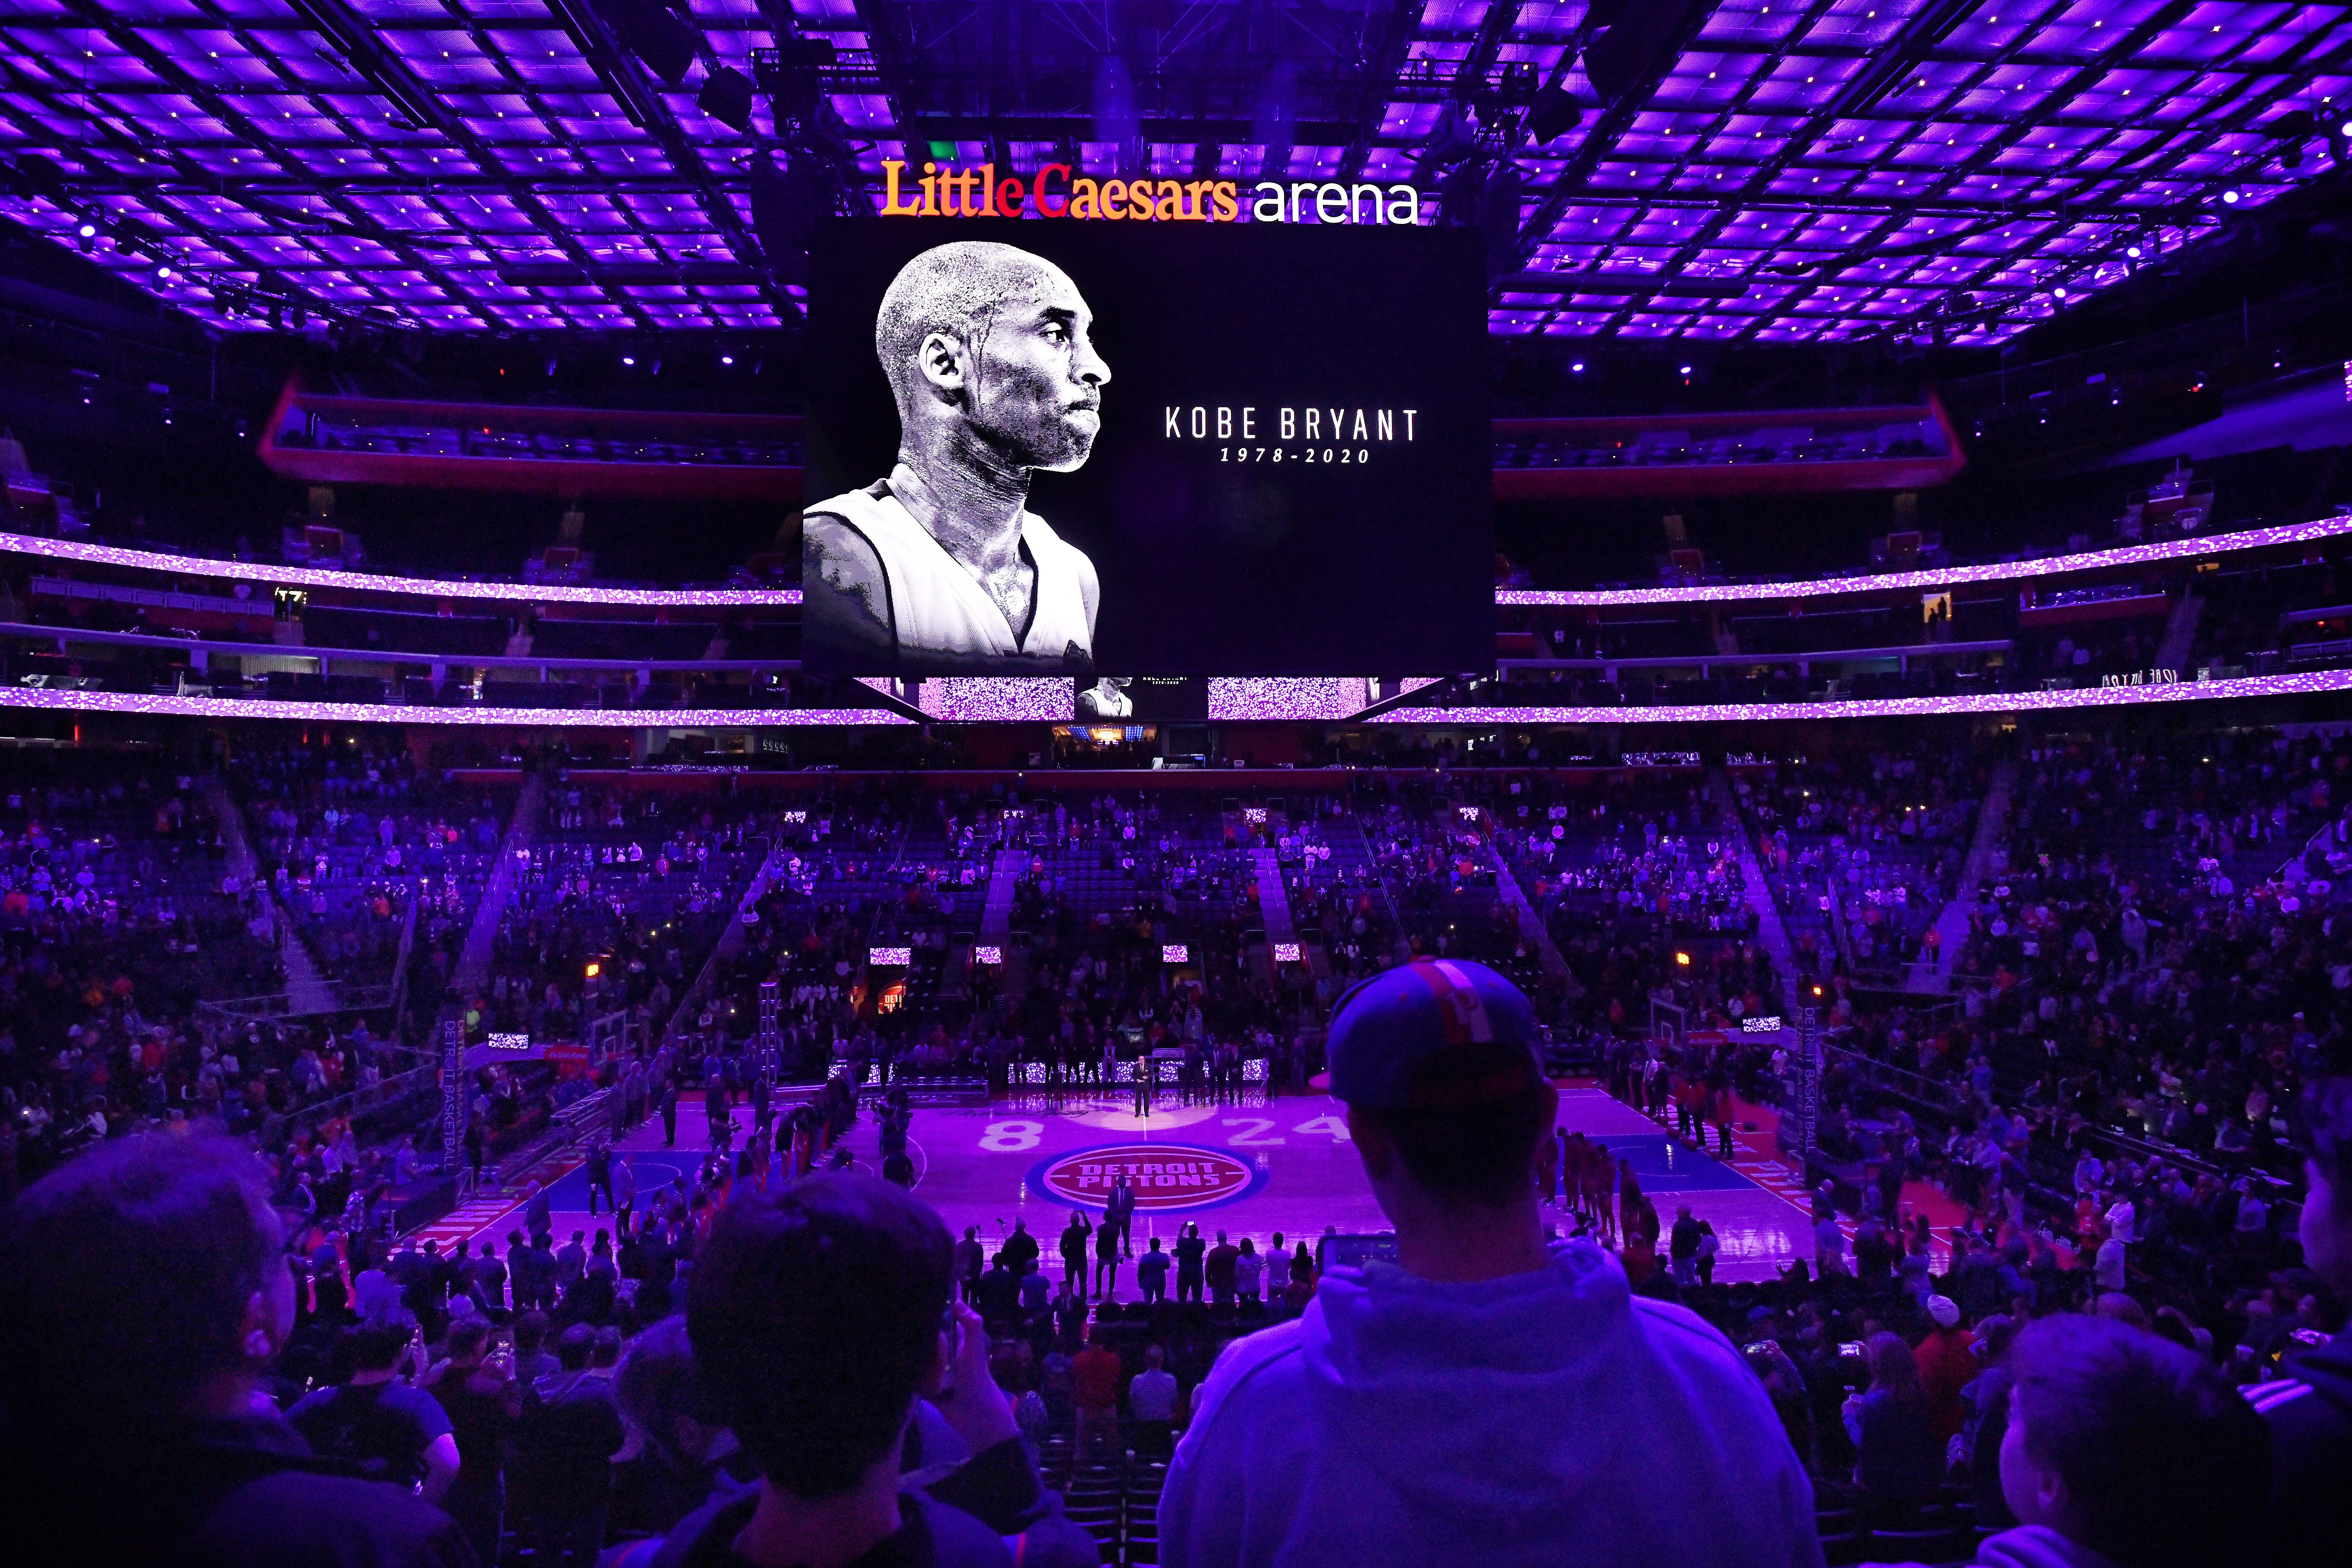 The Detroit Pistons honored Kobe Bryant, who died the day before in a helicopter crash, before taking on the Cleveland Cavaliers at Little Caesars Arena in Detroit, Michigan on January 27, 2020.  Bryant's 13-year old daughter, Gianna, was among those who died in the crash as well.